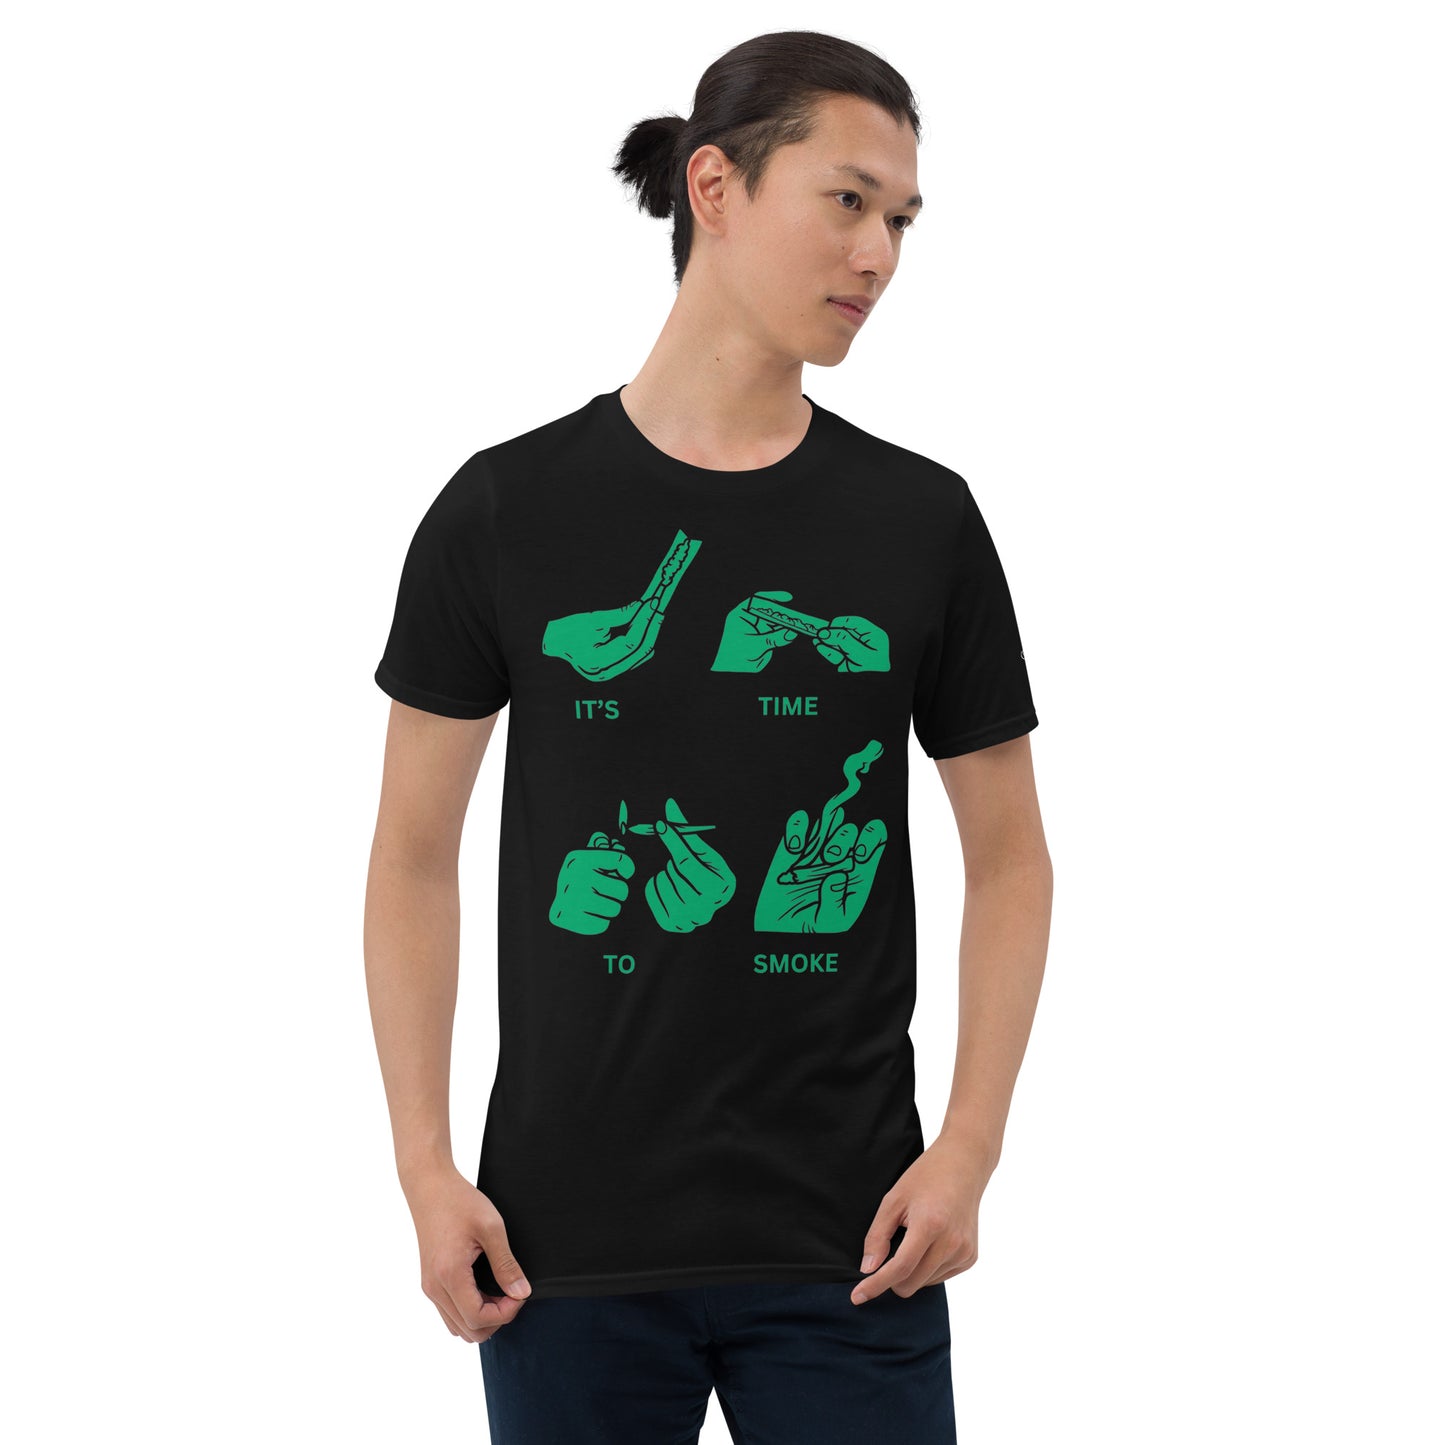 Short-Sleeve Unisex T-Shirt It's about that time solid green (Loud print)